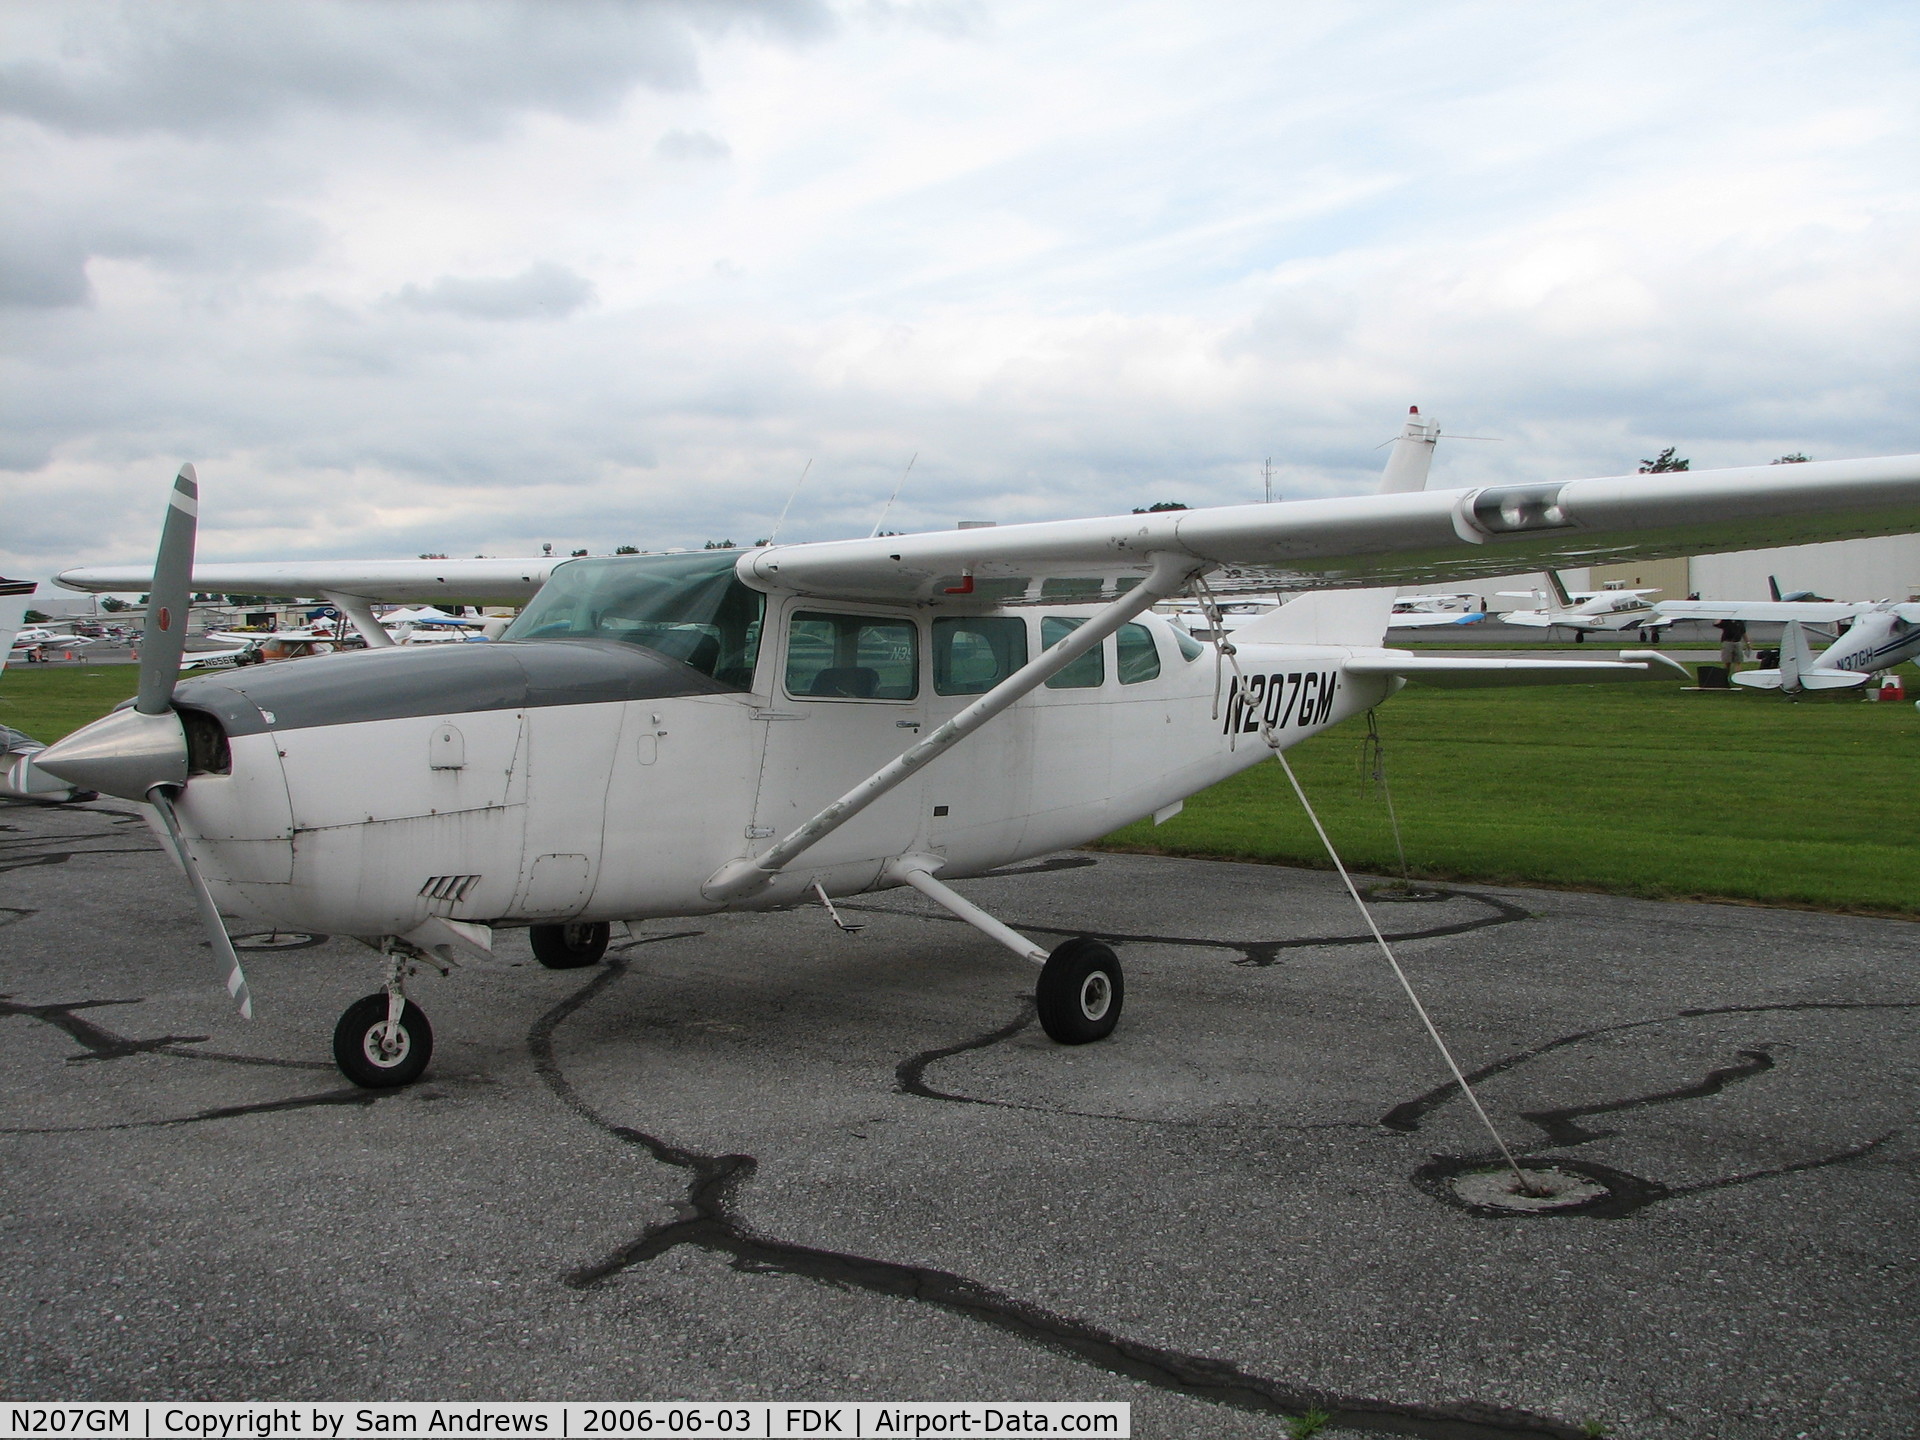 N207GM, 1973 Cessna 207 C/N 20700217, I believe this is a local Aircraft at Frederick